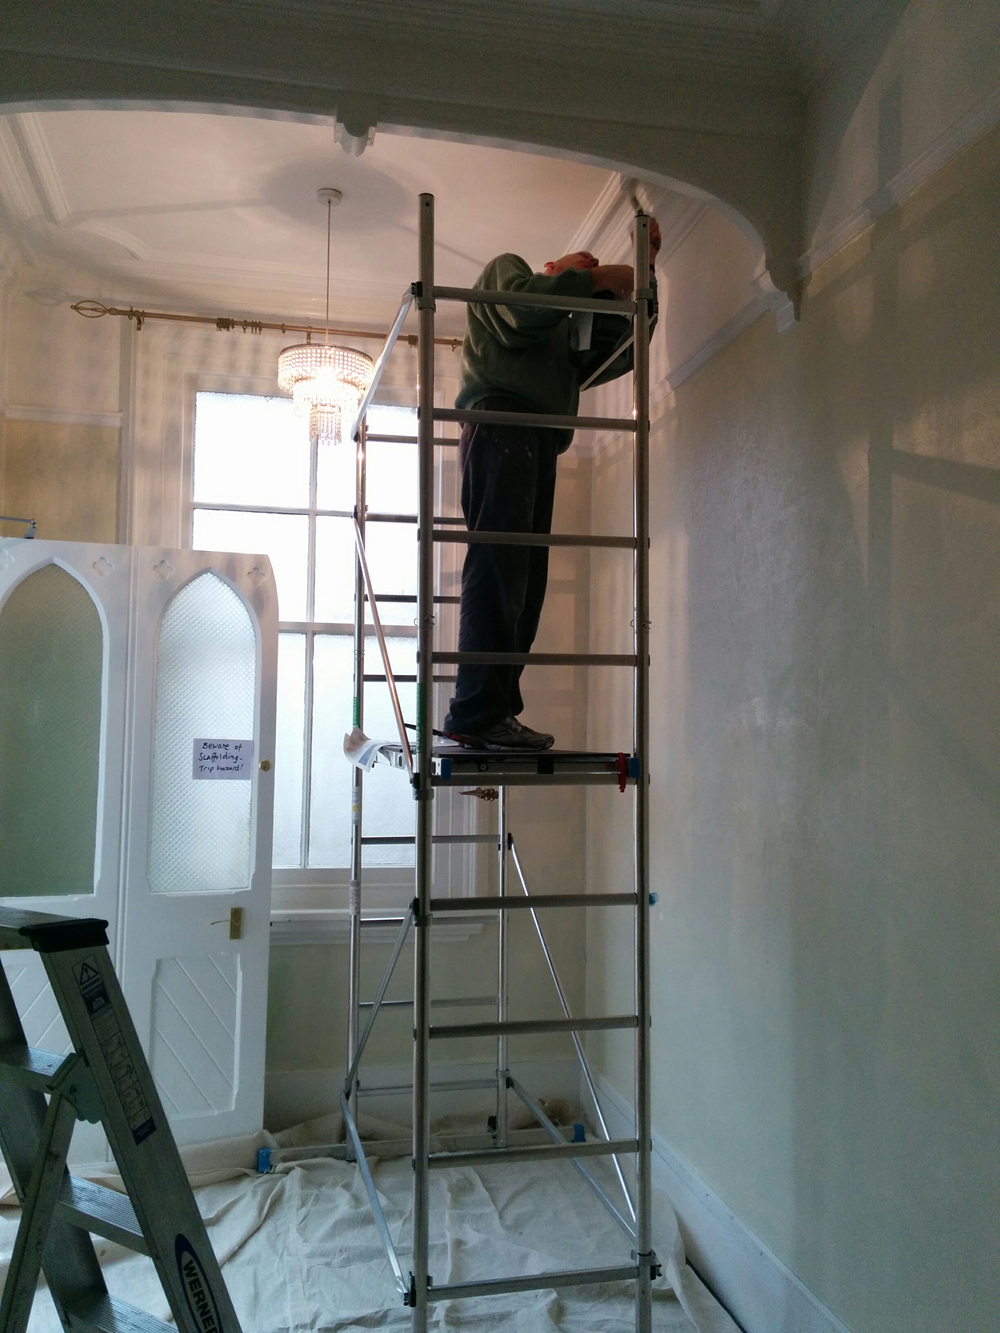 painting the communal hall ceiling